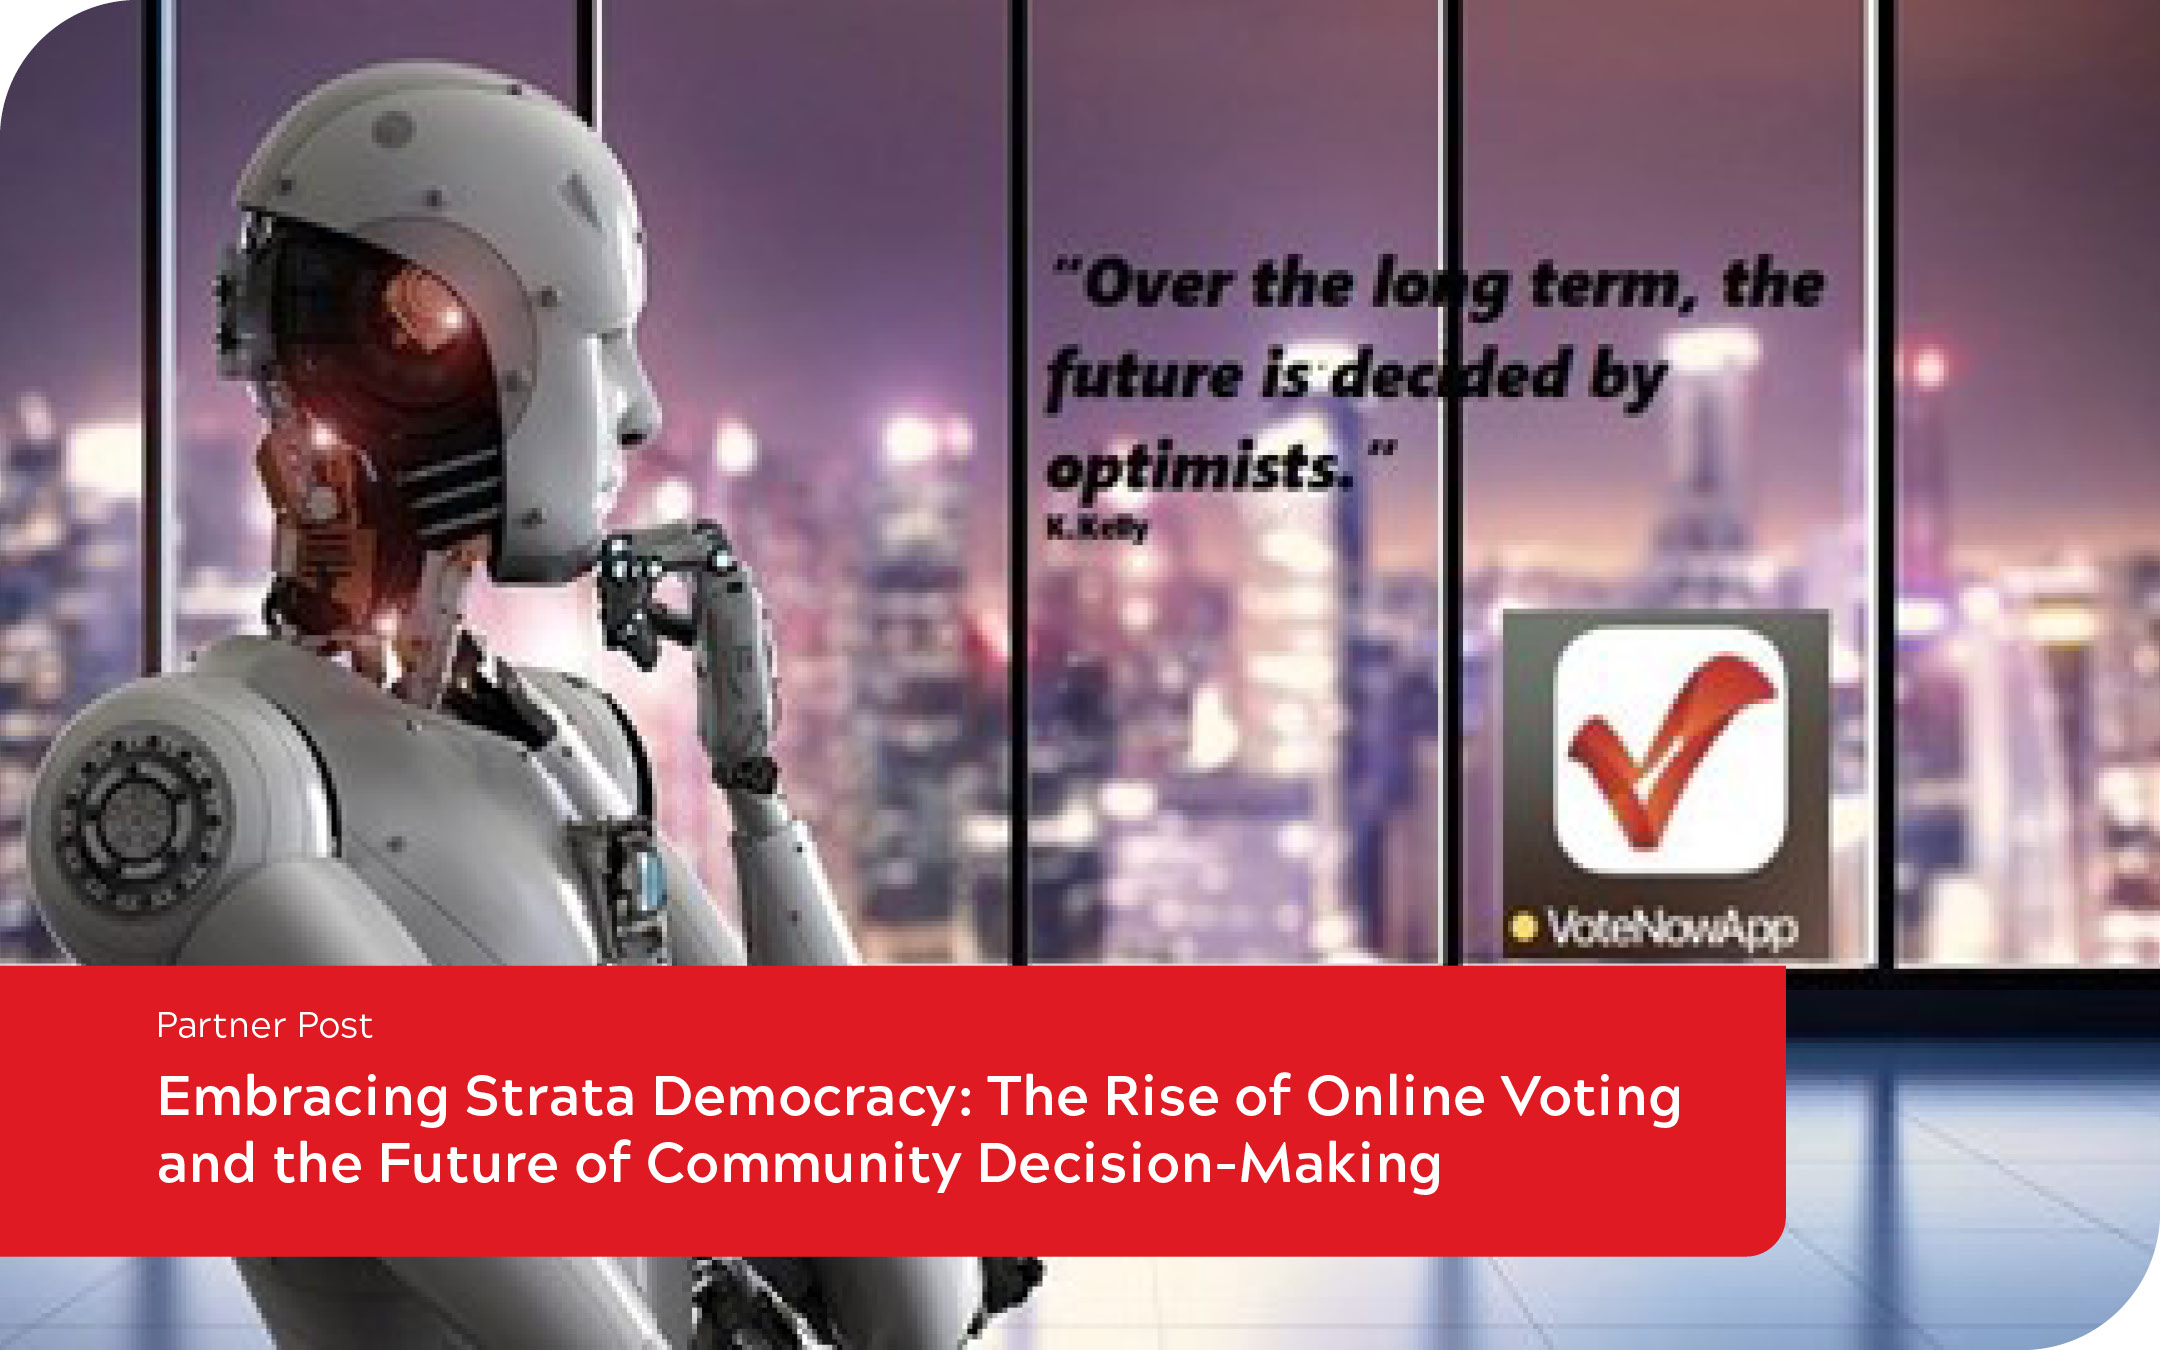 Embracing Strata Democracy: The Rise of Online Voting and the Future of Community Decision-Making